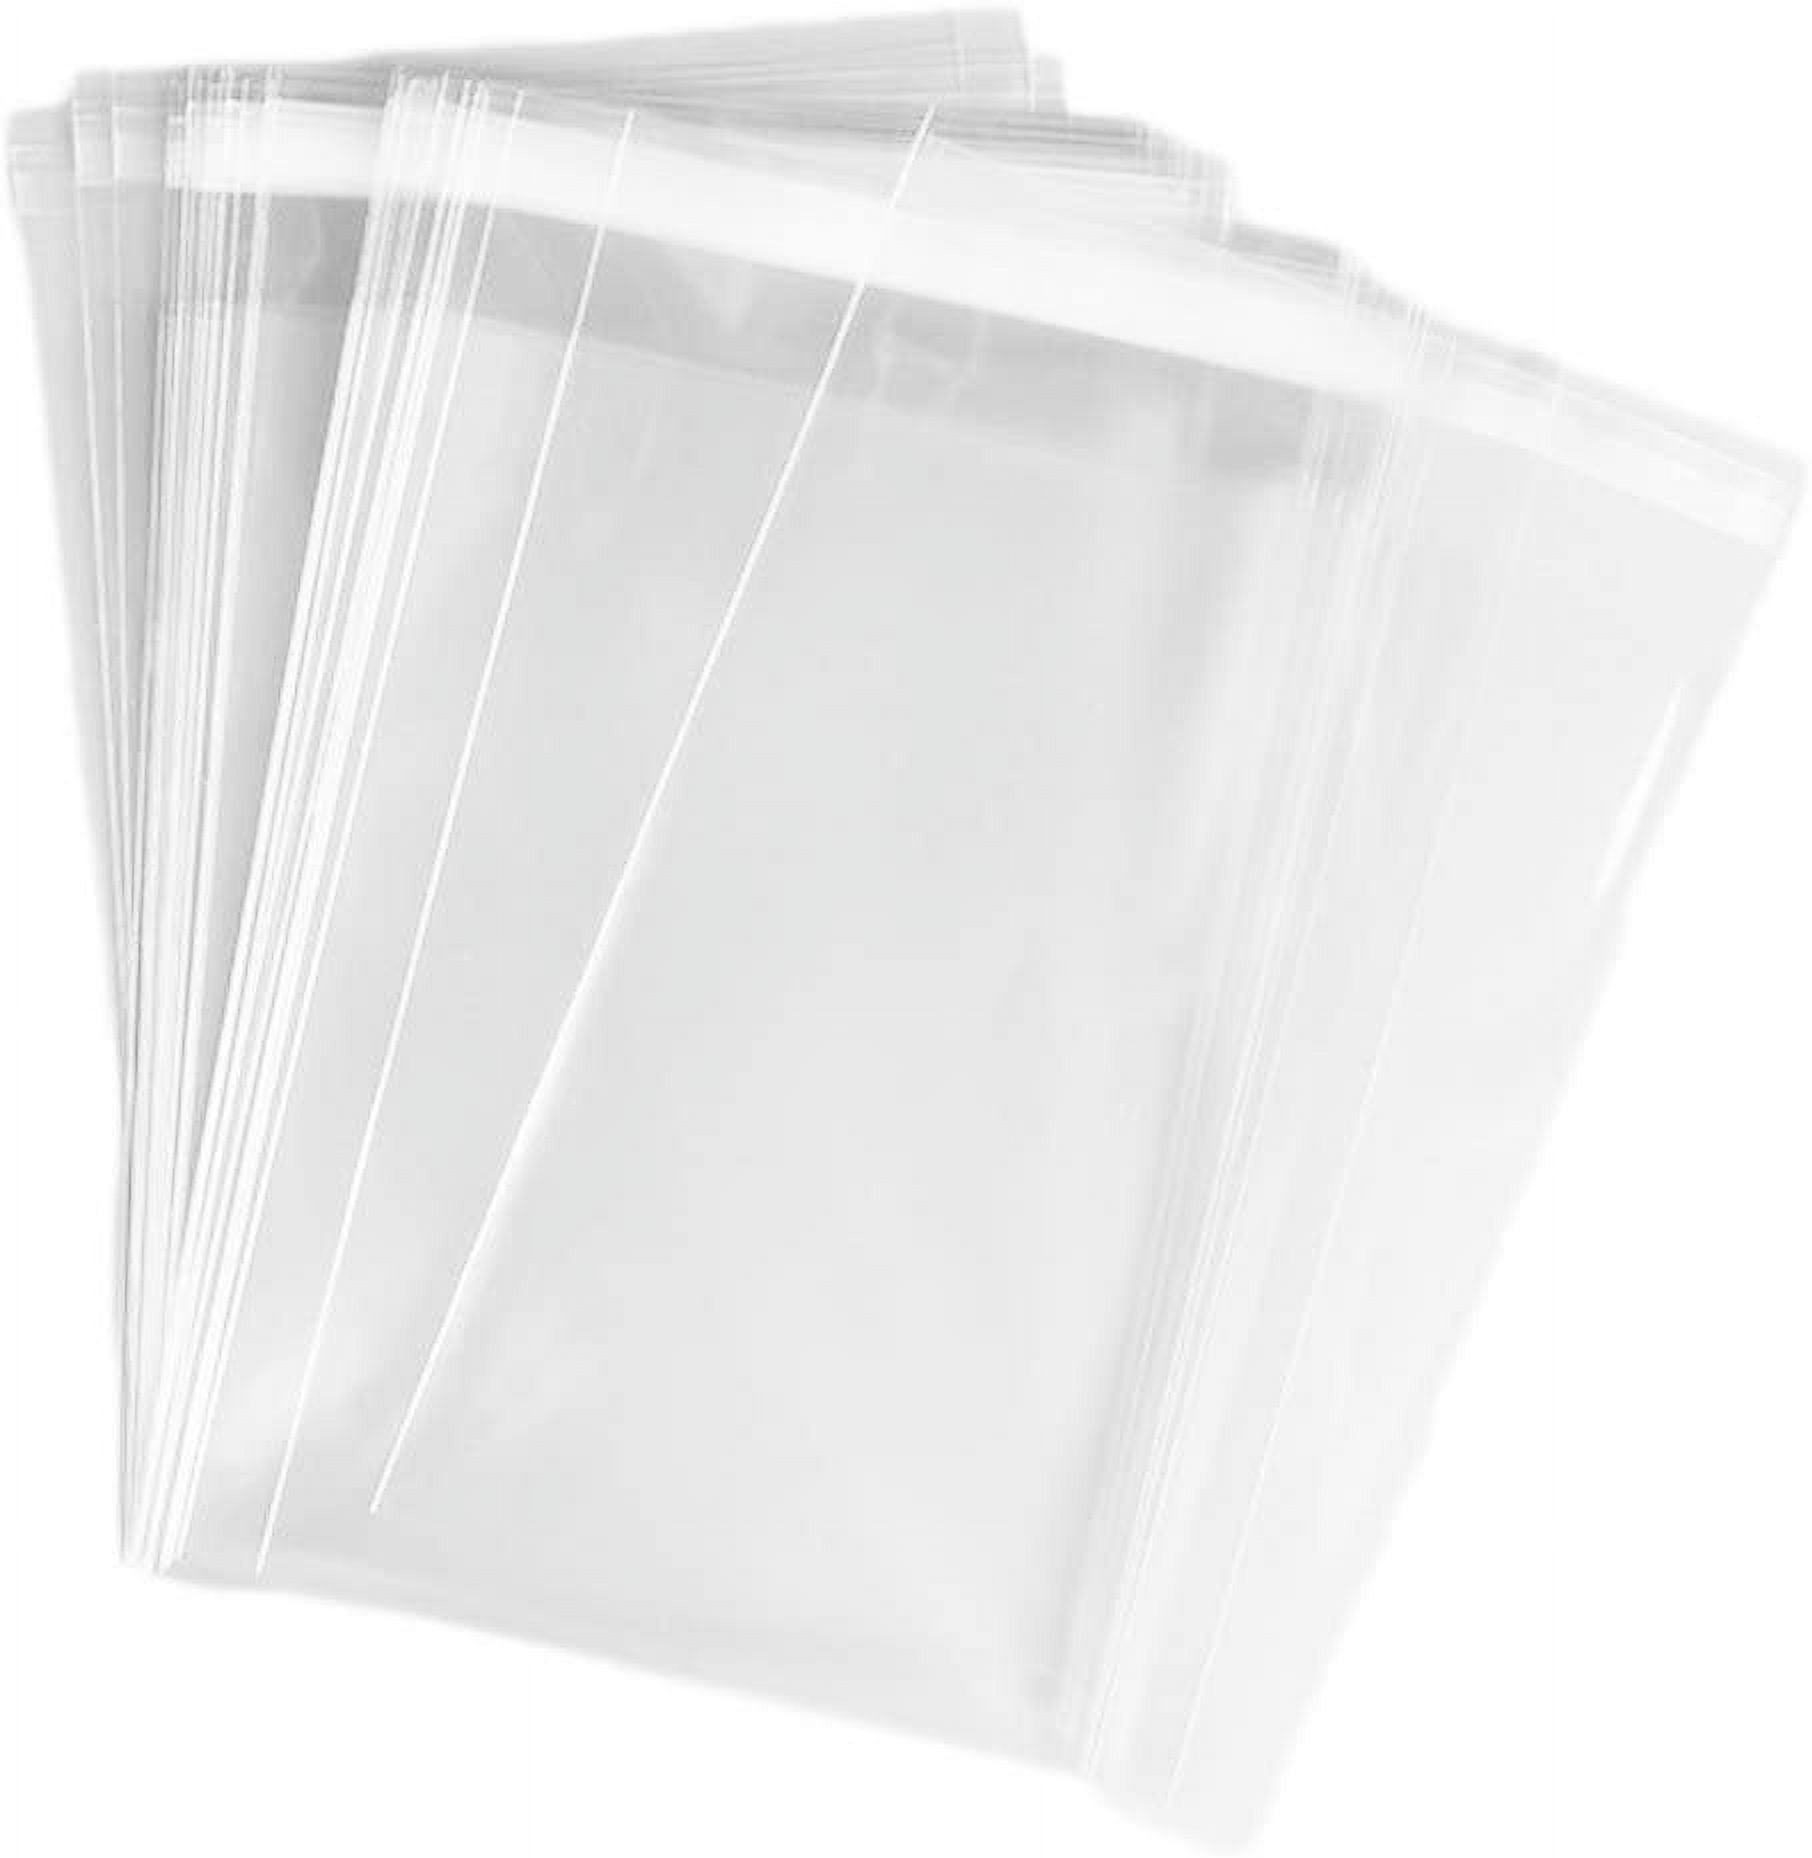 100 Pcs 8 x 10 Self Seal Clear Cello Cellophane Bags Resealable Plastic Apparel Bags Perfect for Packaging Clothing, T-Shirt, Brochure, Prints